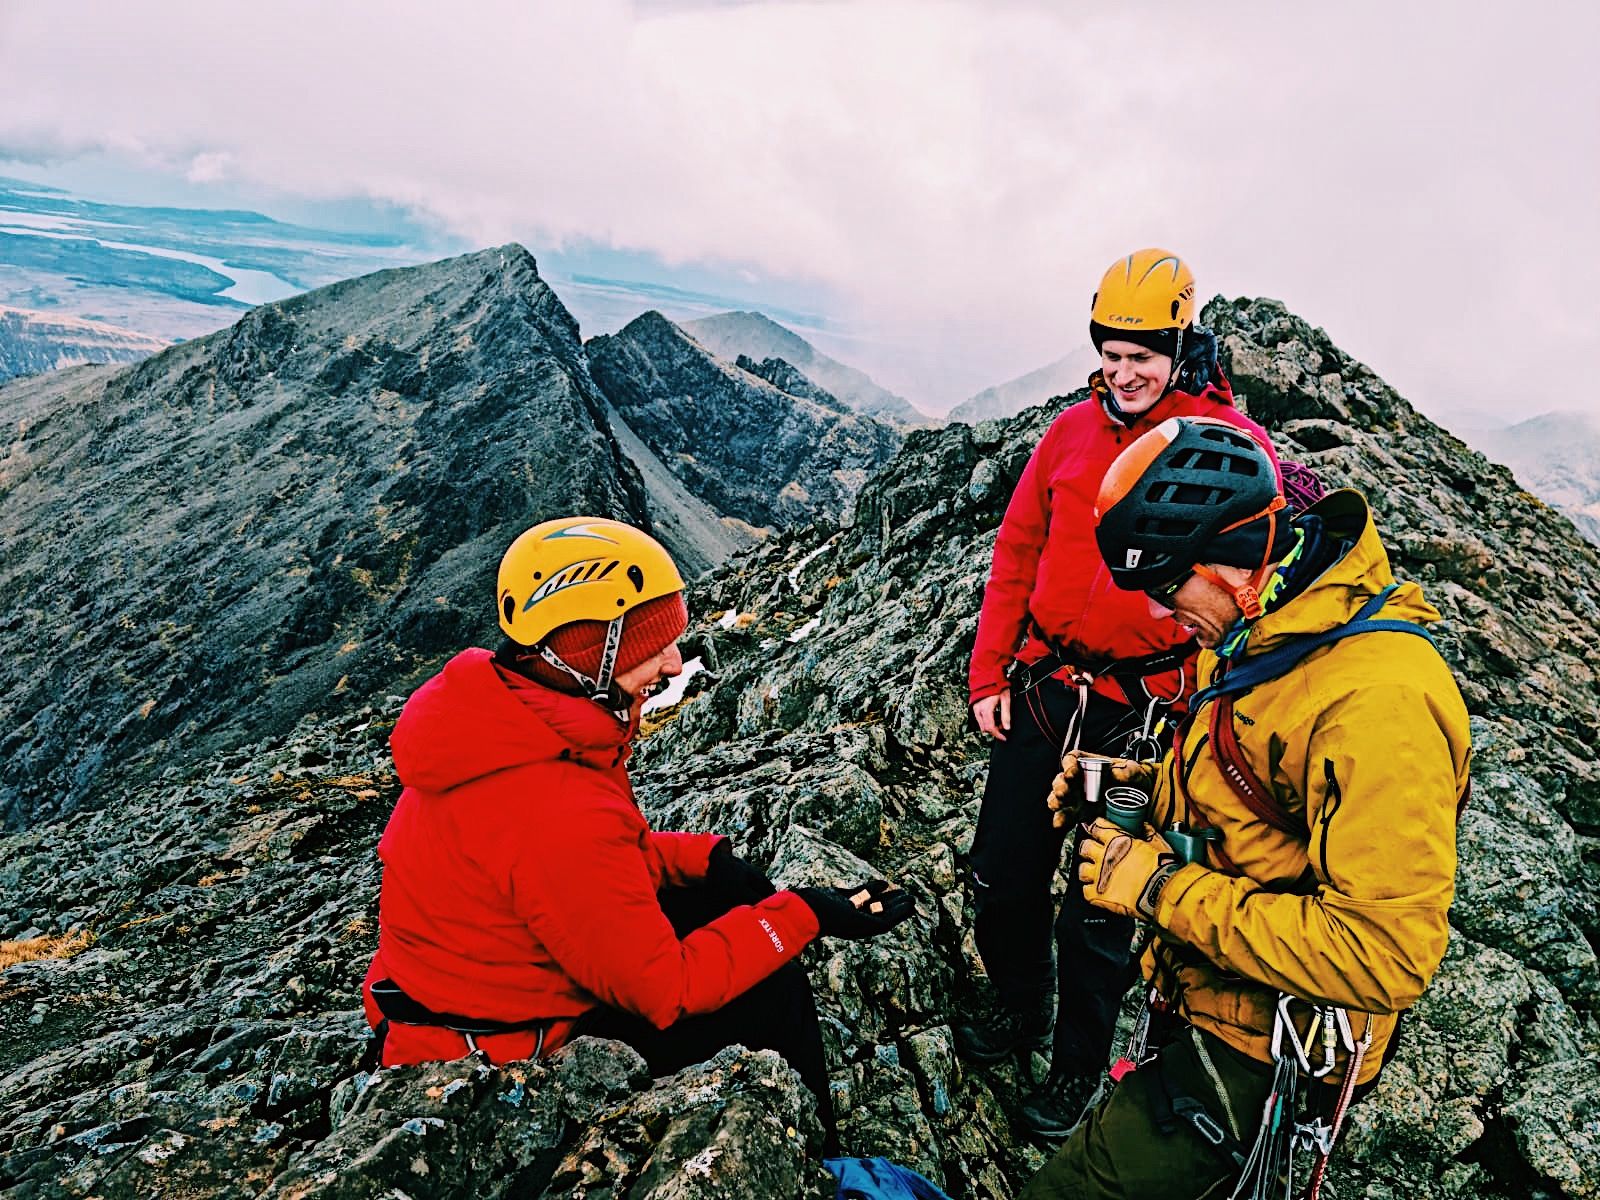 Climbers on a mountain on the Isle of Skye, celebrating an ascent with a wee dram.